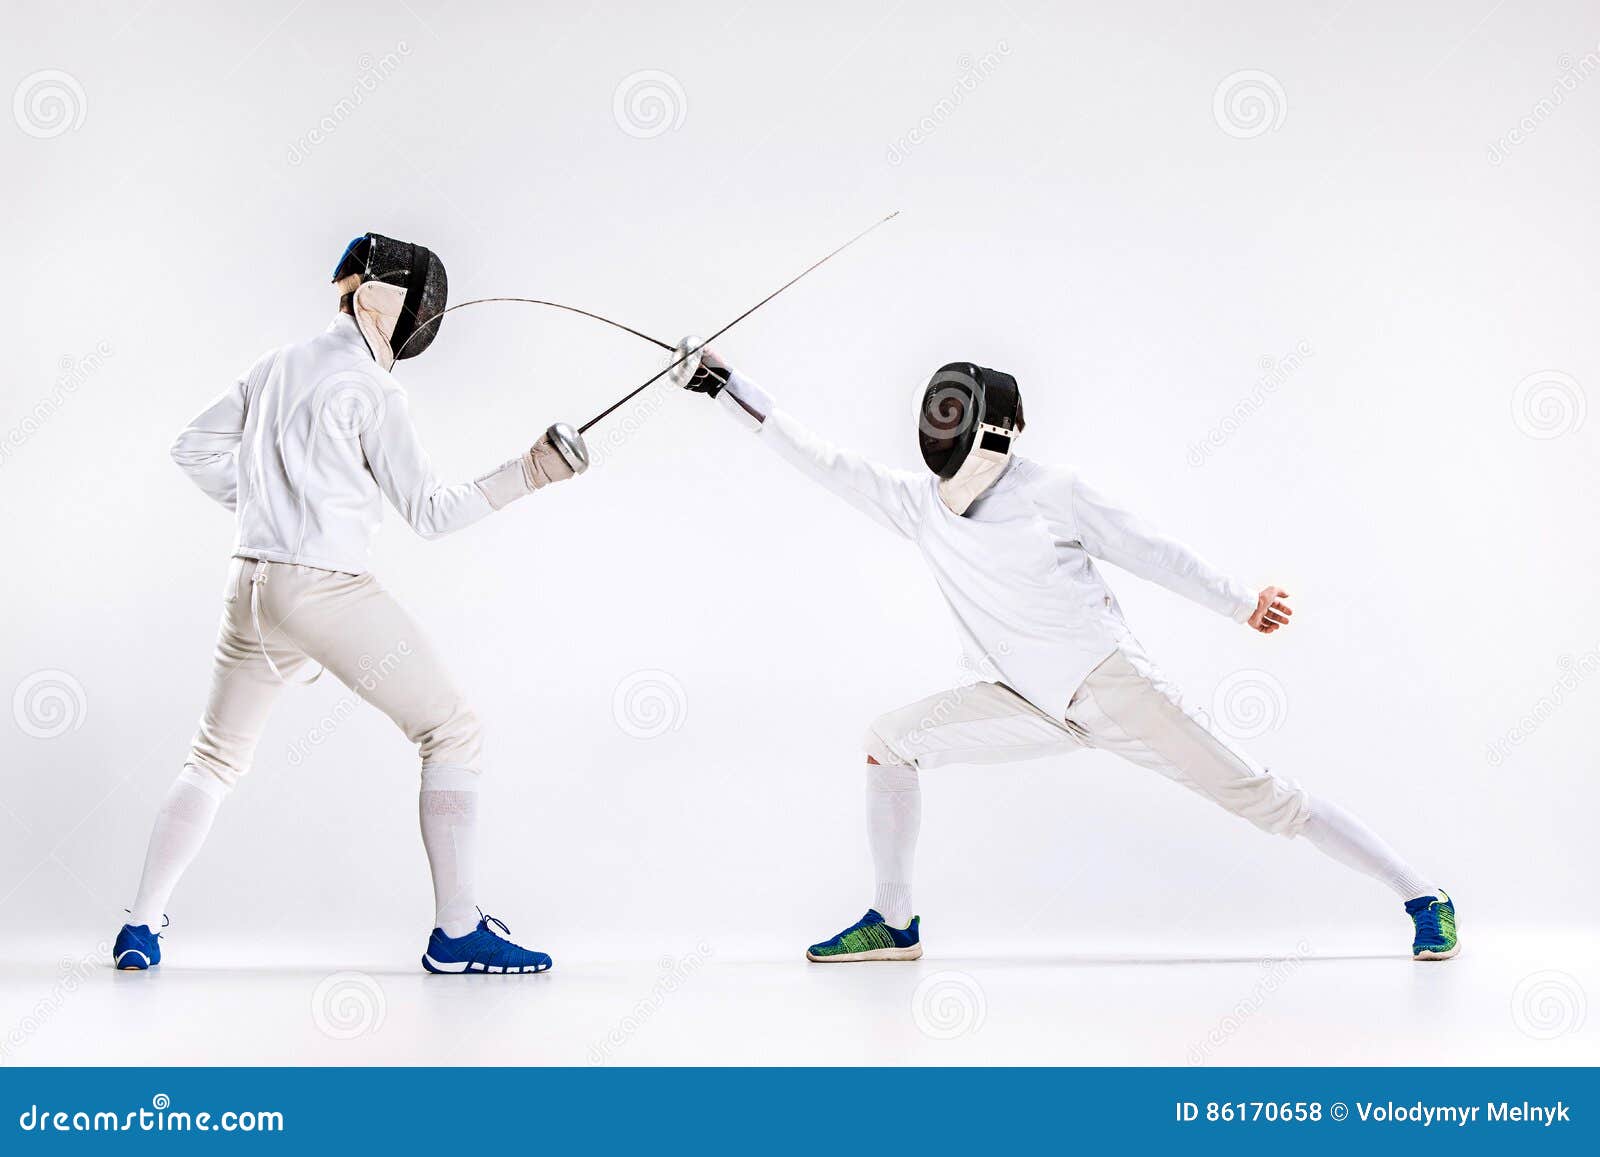 the two men wearing fencing suit practicing with sword against gray